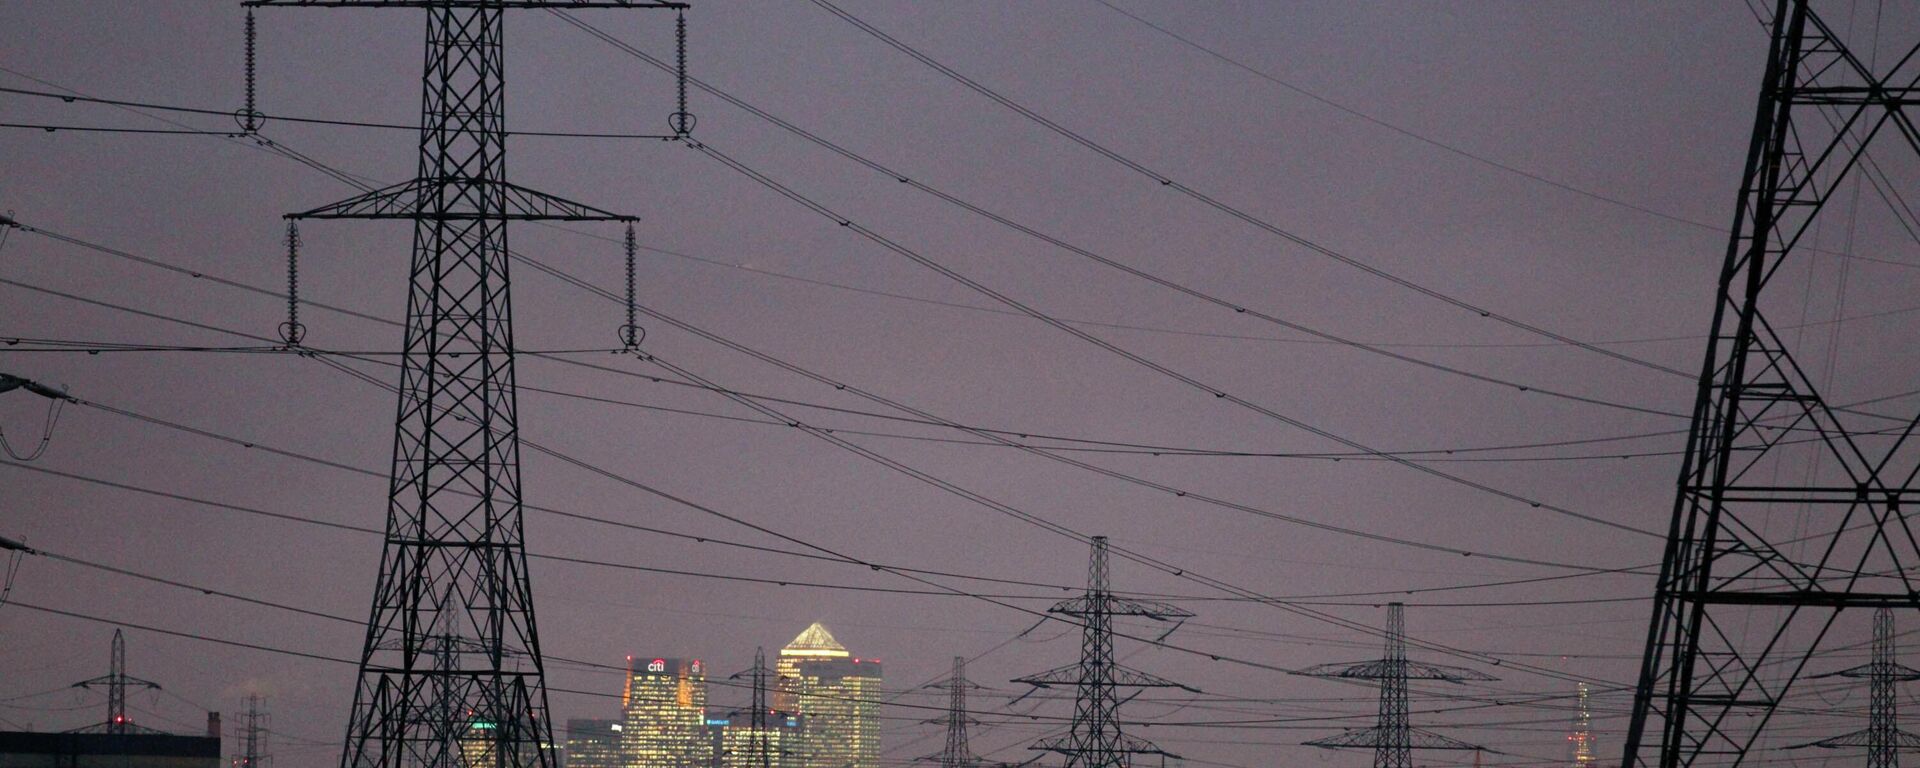 Power lines and pylons are seen with the financial heart of London, Canary Wharf, in the distance on January 25, 2012.  - Sputnik International, 1920, 02.11.2022